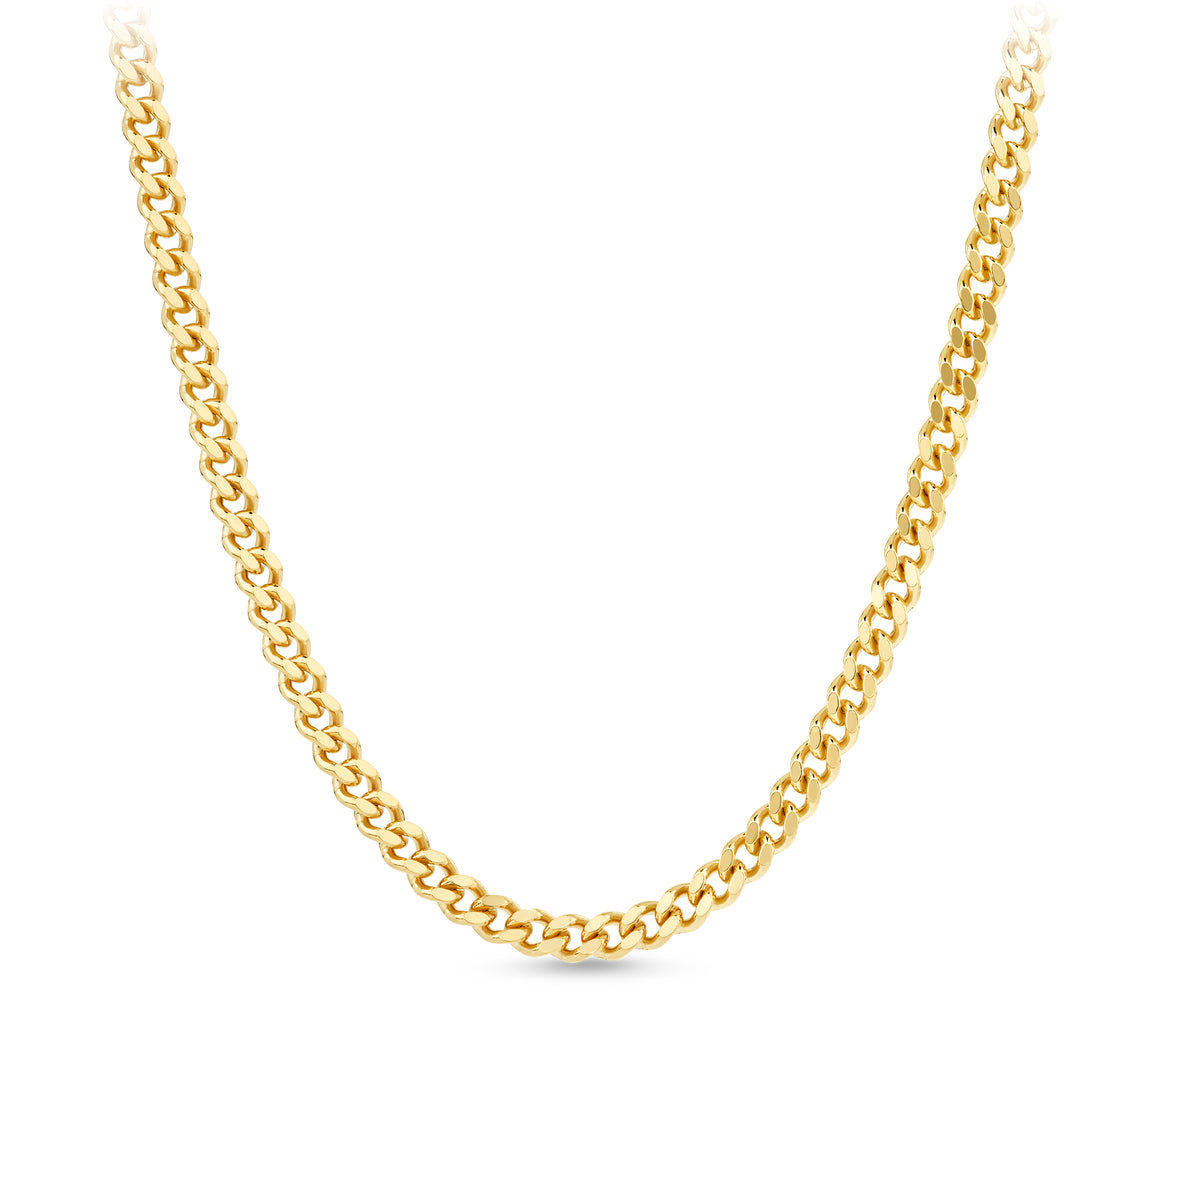 55cm Diamond Cut Curb Link Chain in 9ct Yellow Gold